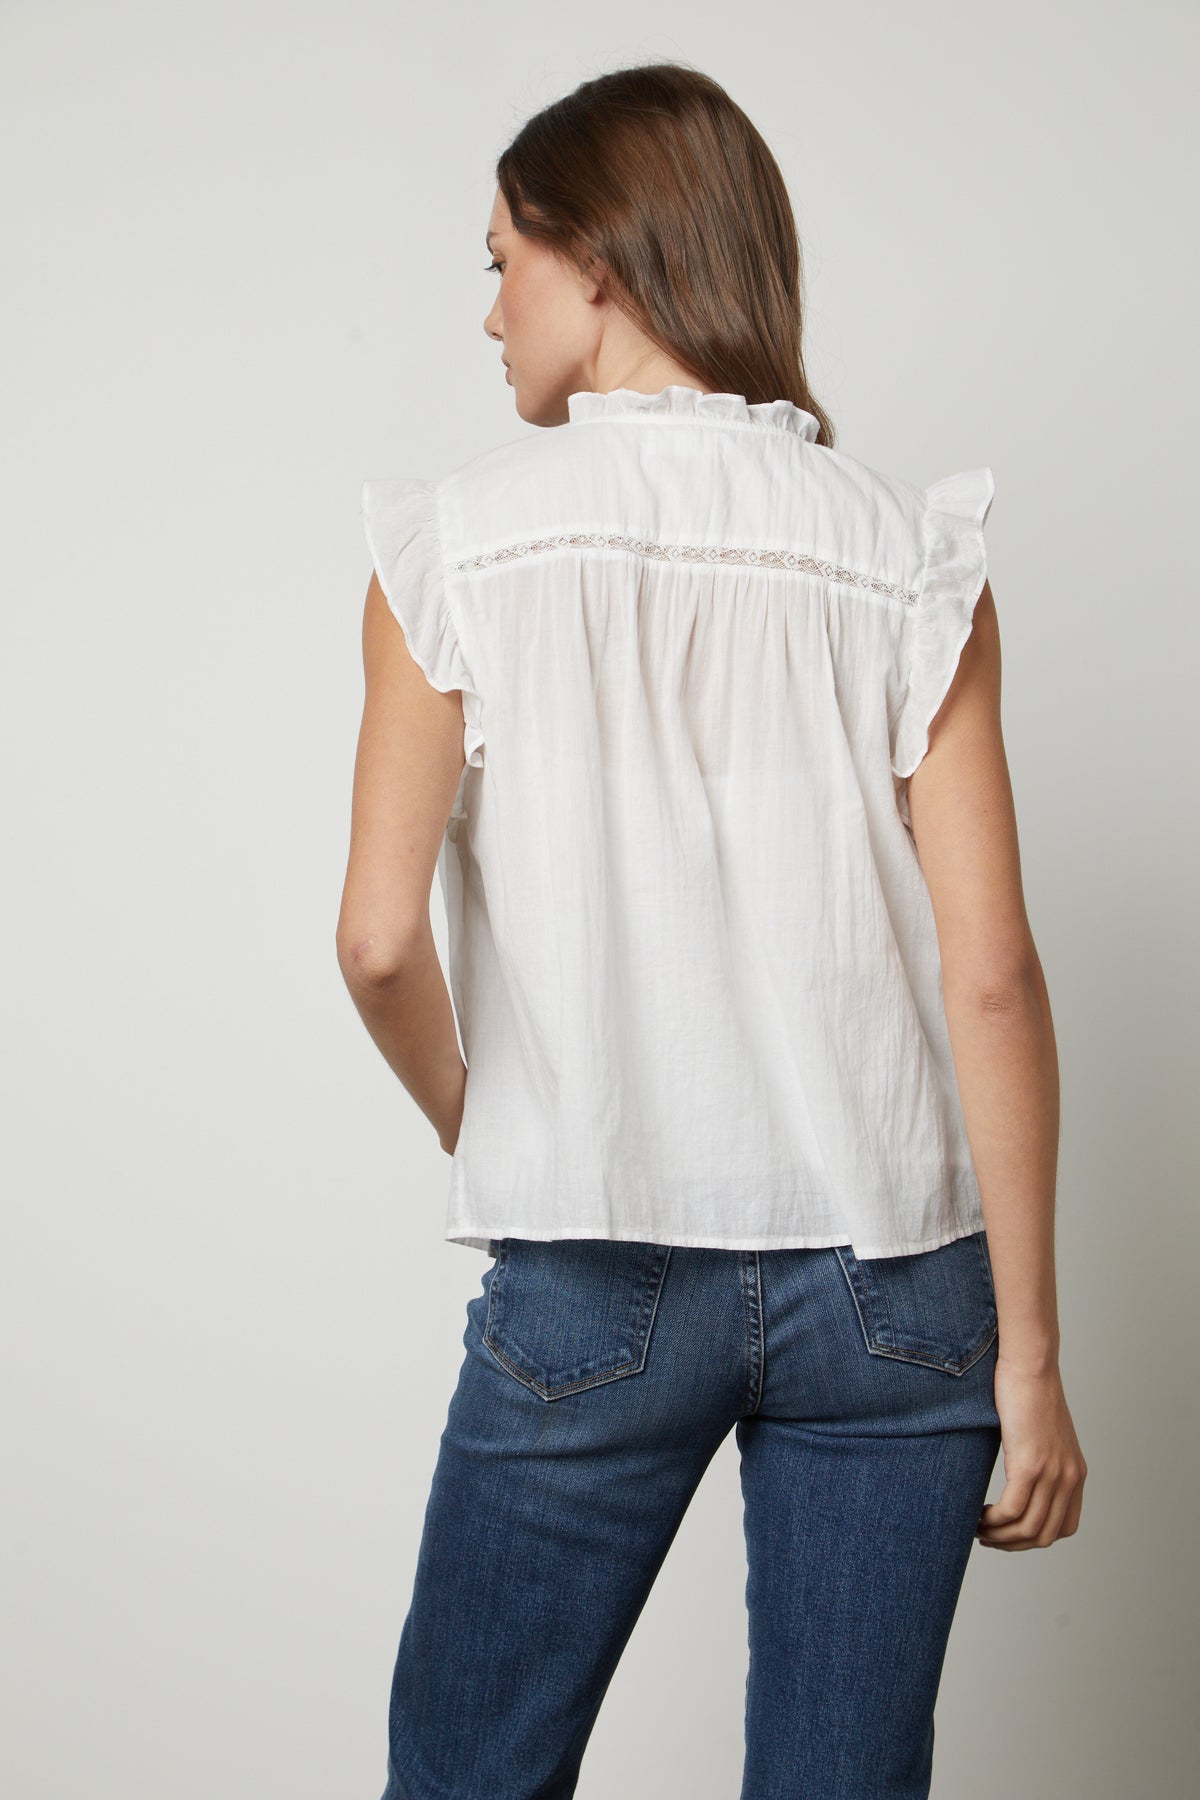 The back view of a woman wearing a LIANA LACE TANK TOP from Velvet by Graham & Spencer with cotton lace detailing.-35656122663105